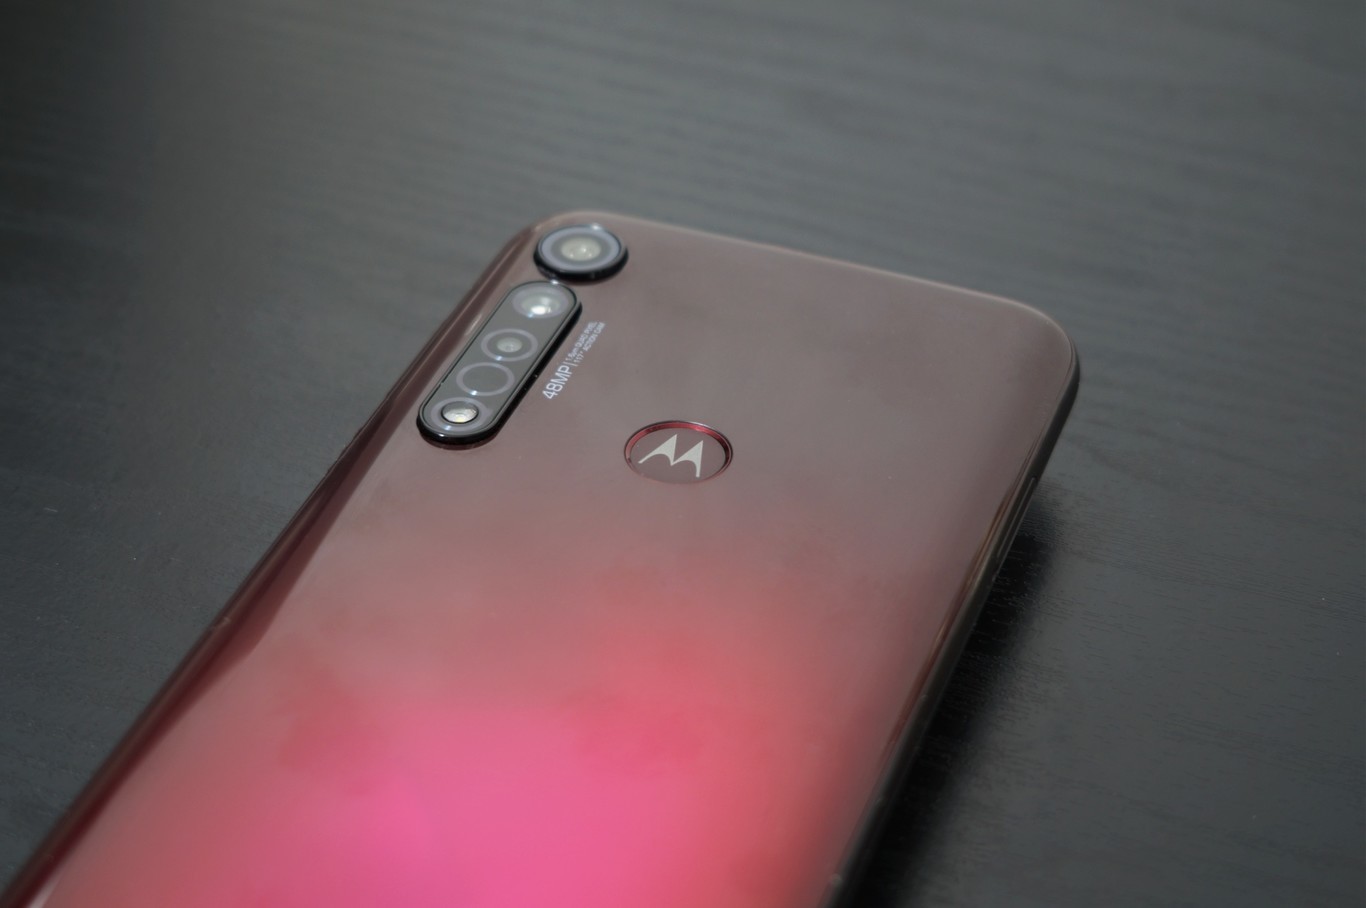 Motorola One Fusion and One Fusion+ specs and pricing details leaked.